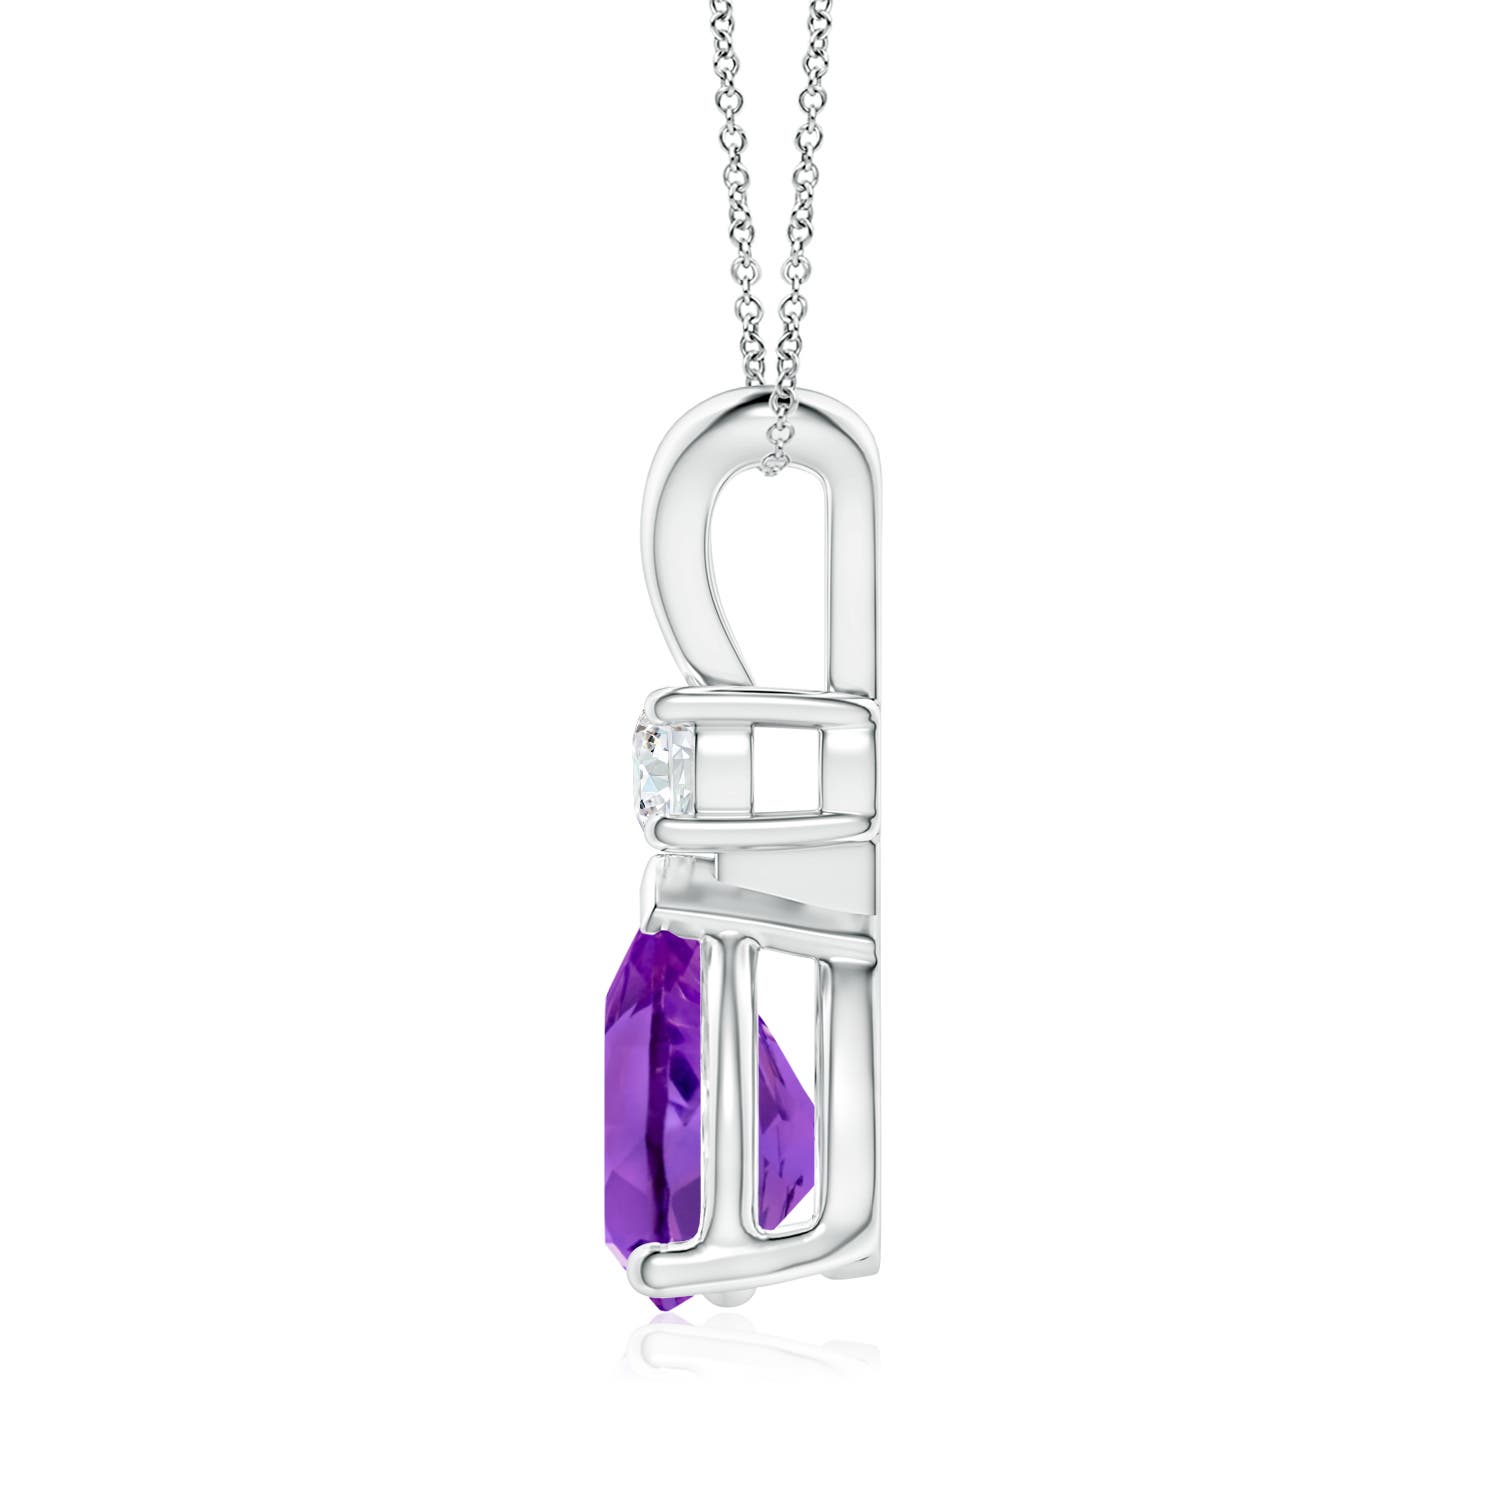 AAA - Amethyst / 1.78 CT / 14 KT White Gold